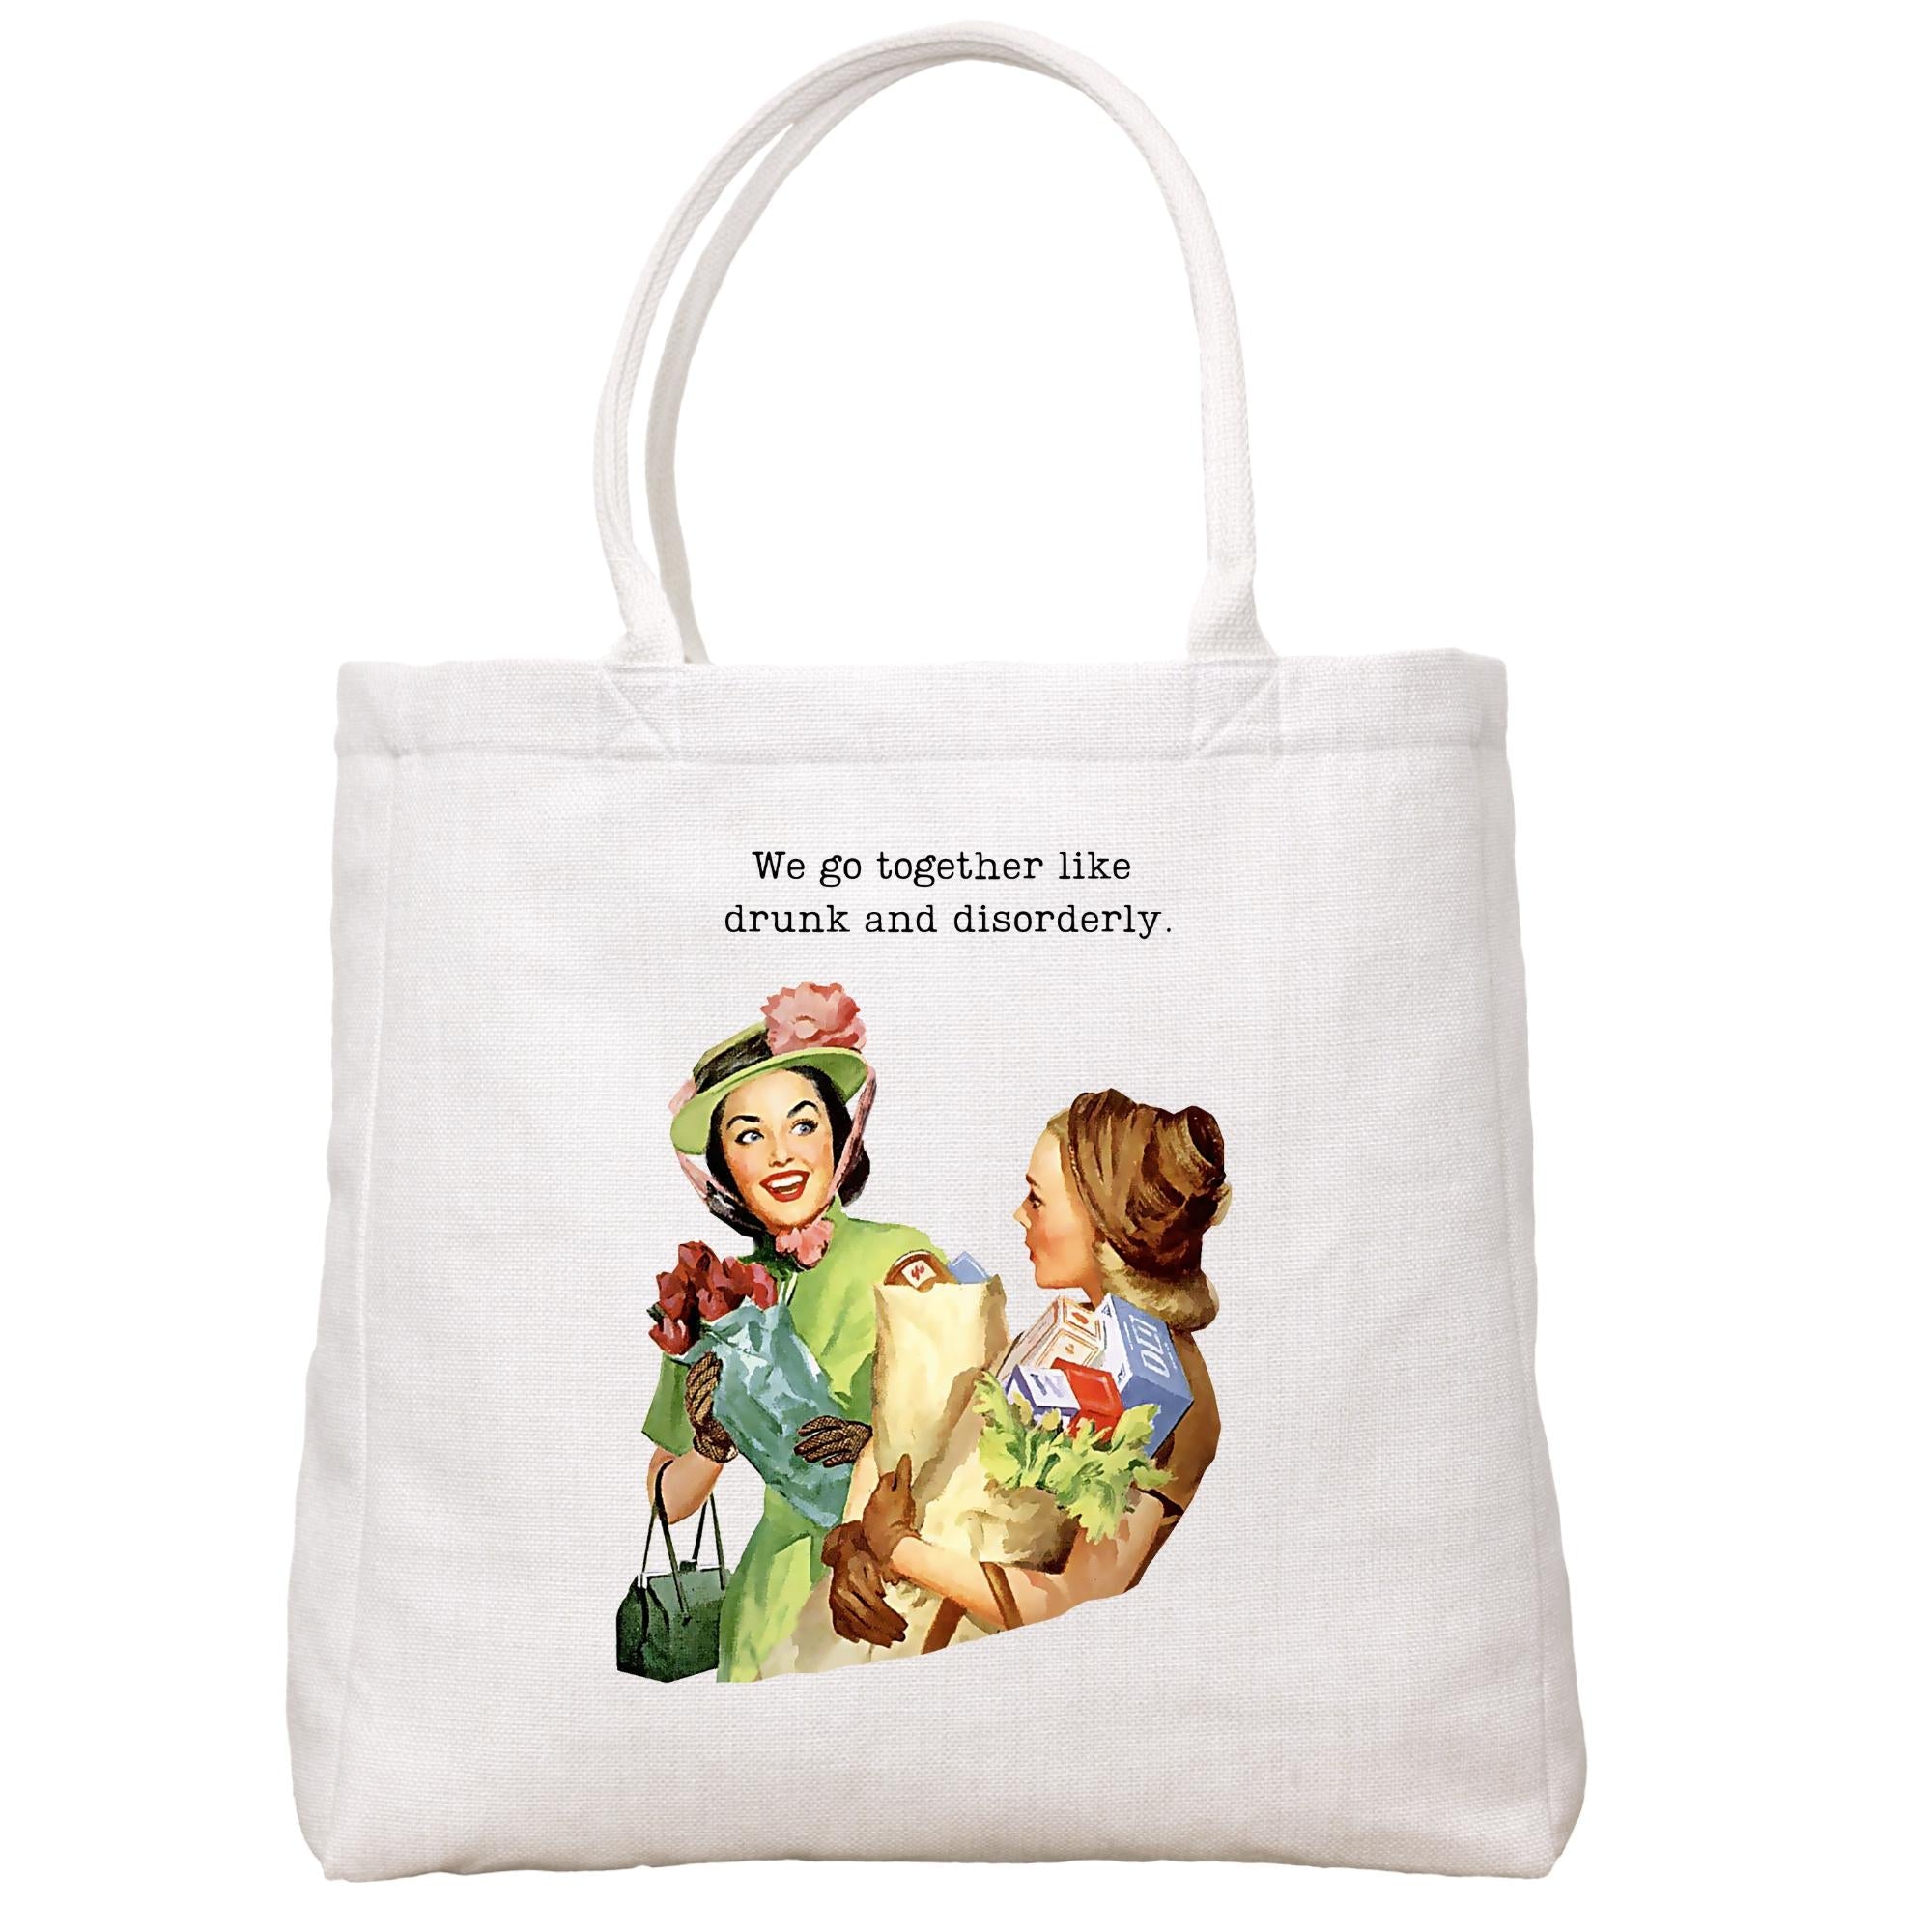 Drunk And Disorderly Tote Bag Tote Bag - Southern Sisters